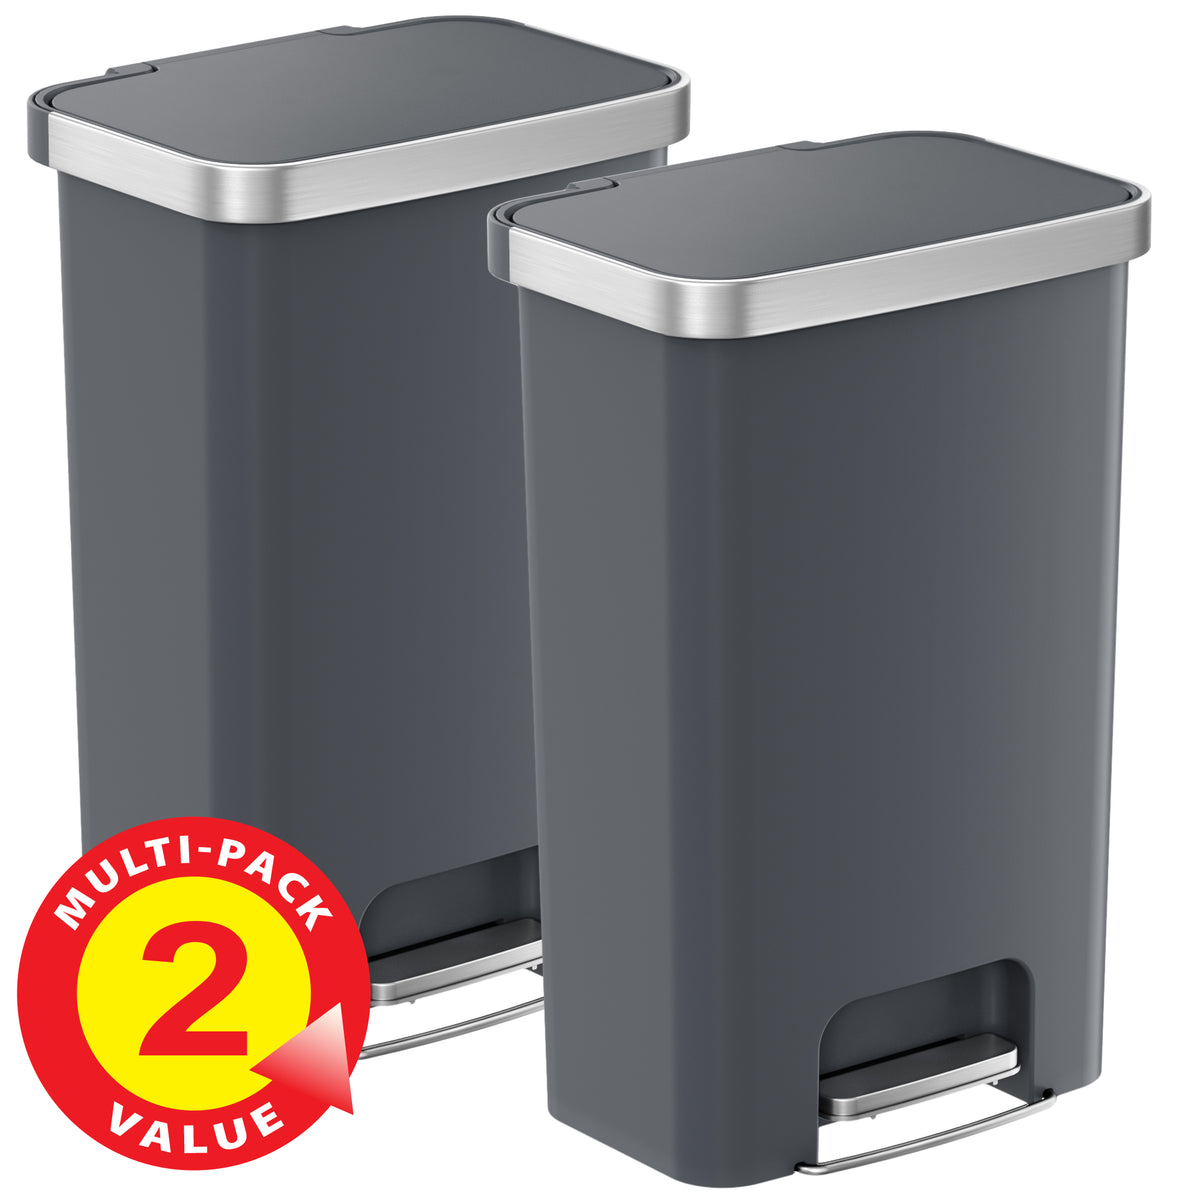 13.2 Gallon / 50 Liter SoftStep Prime Step Pedal Trash Can (Gray) - 2-PACK